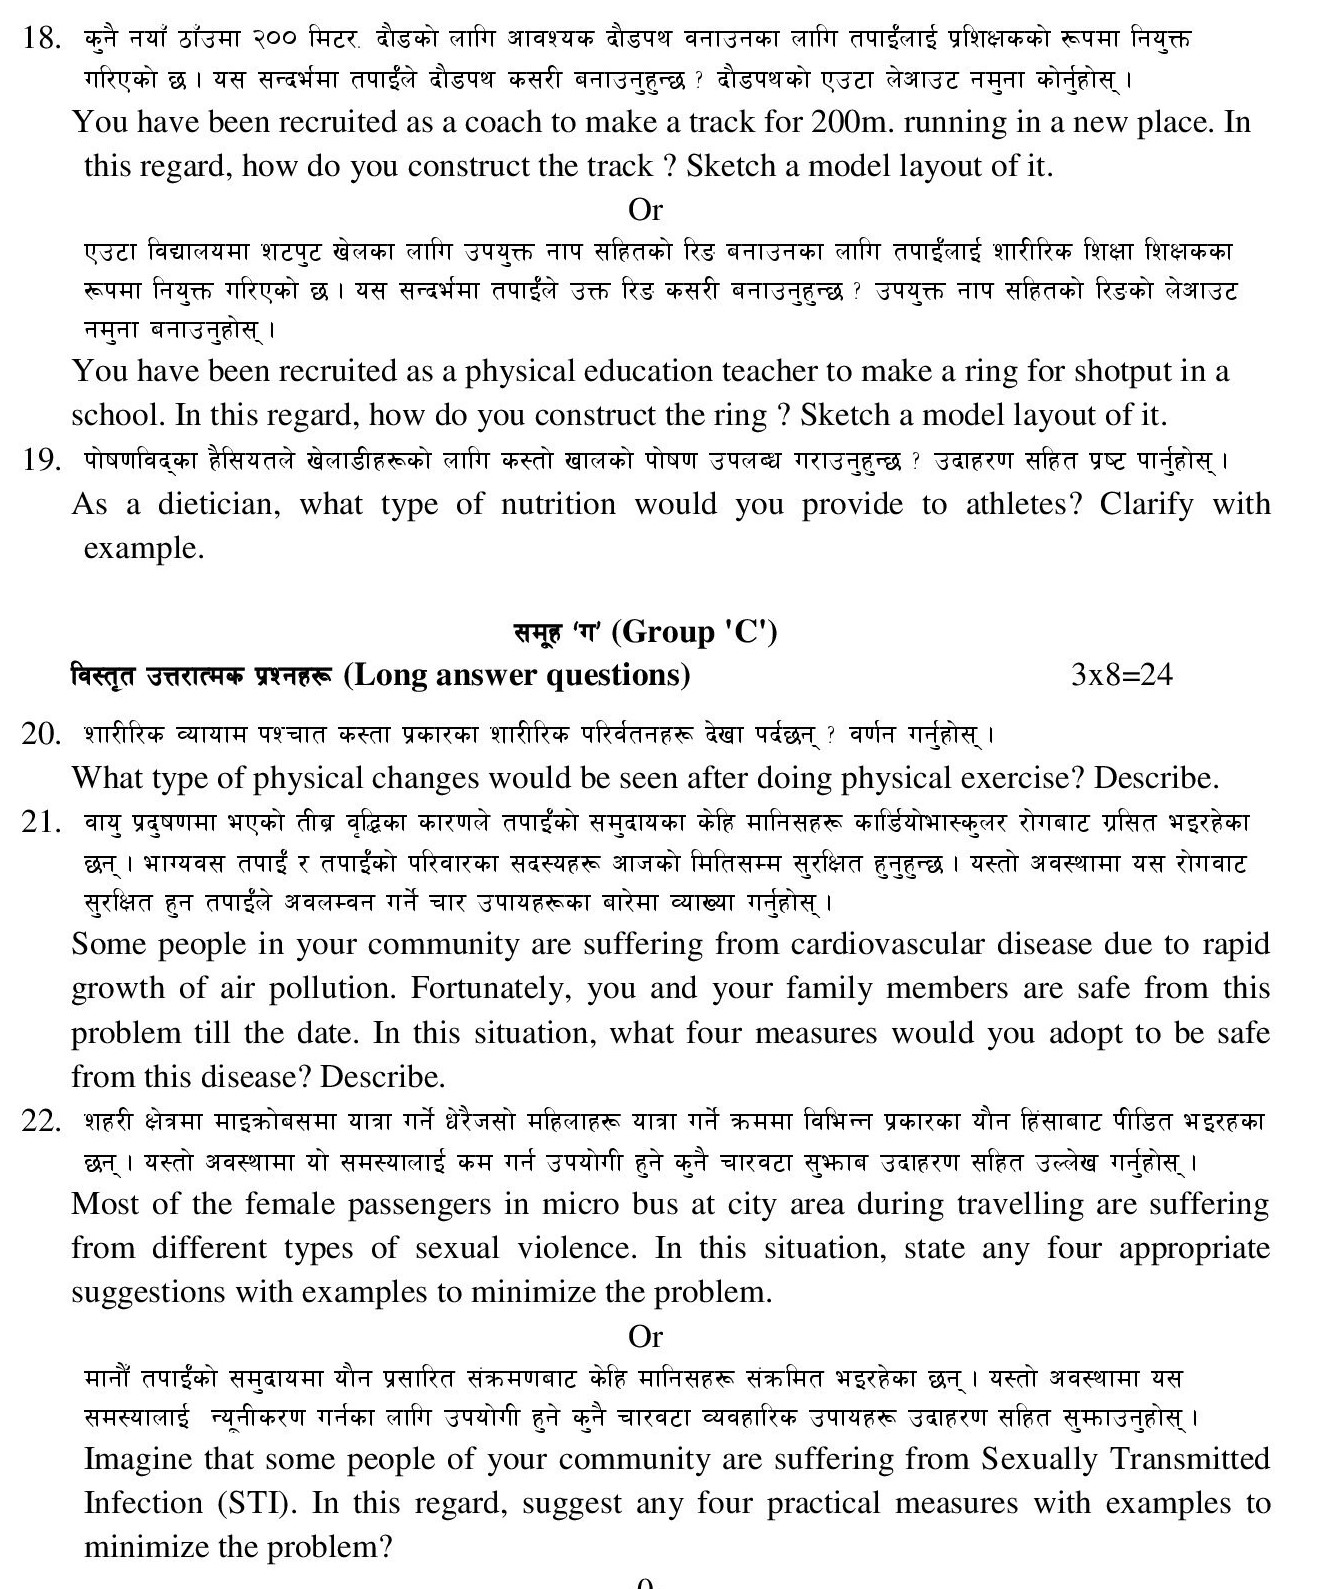 Health and Physical Education: Class 12 Model Question 2080